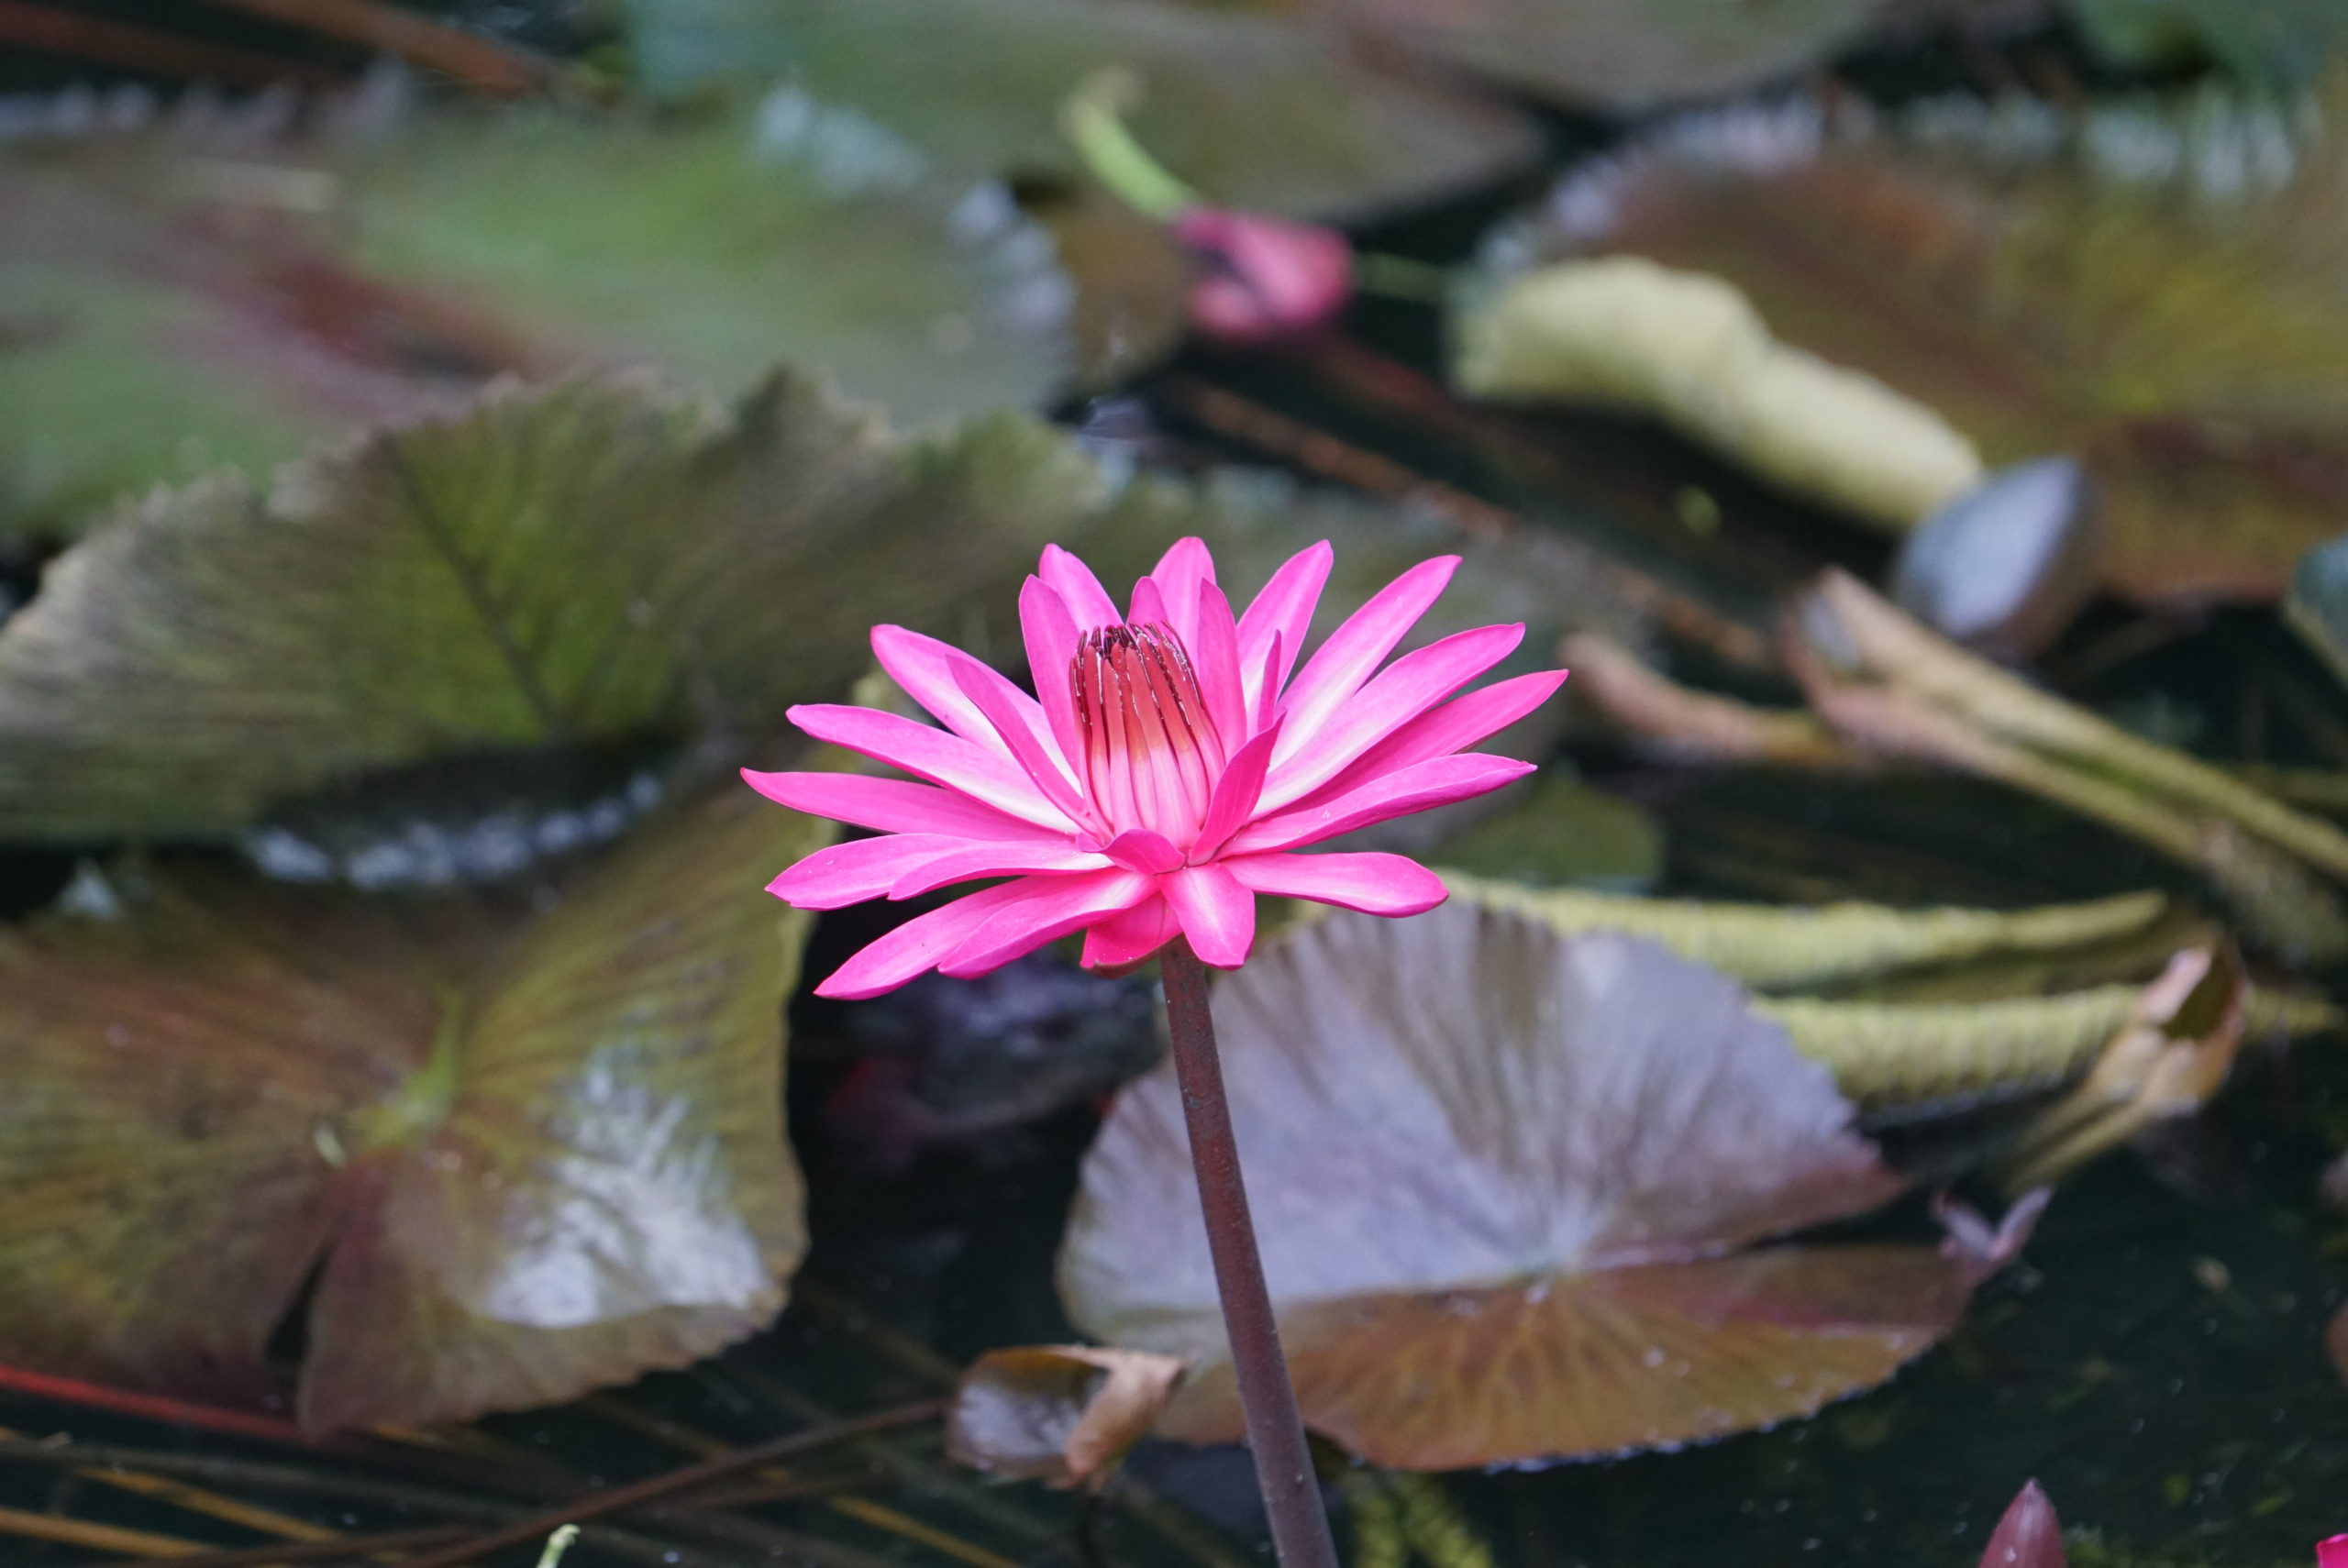 water lilly - Flowersandcents.com is off to Quito for Expoflor 2022